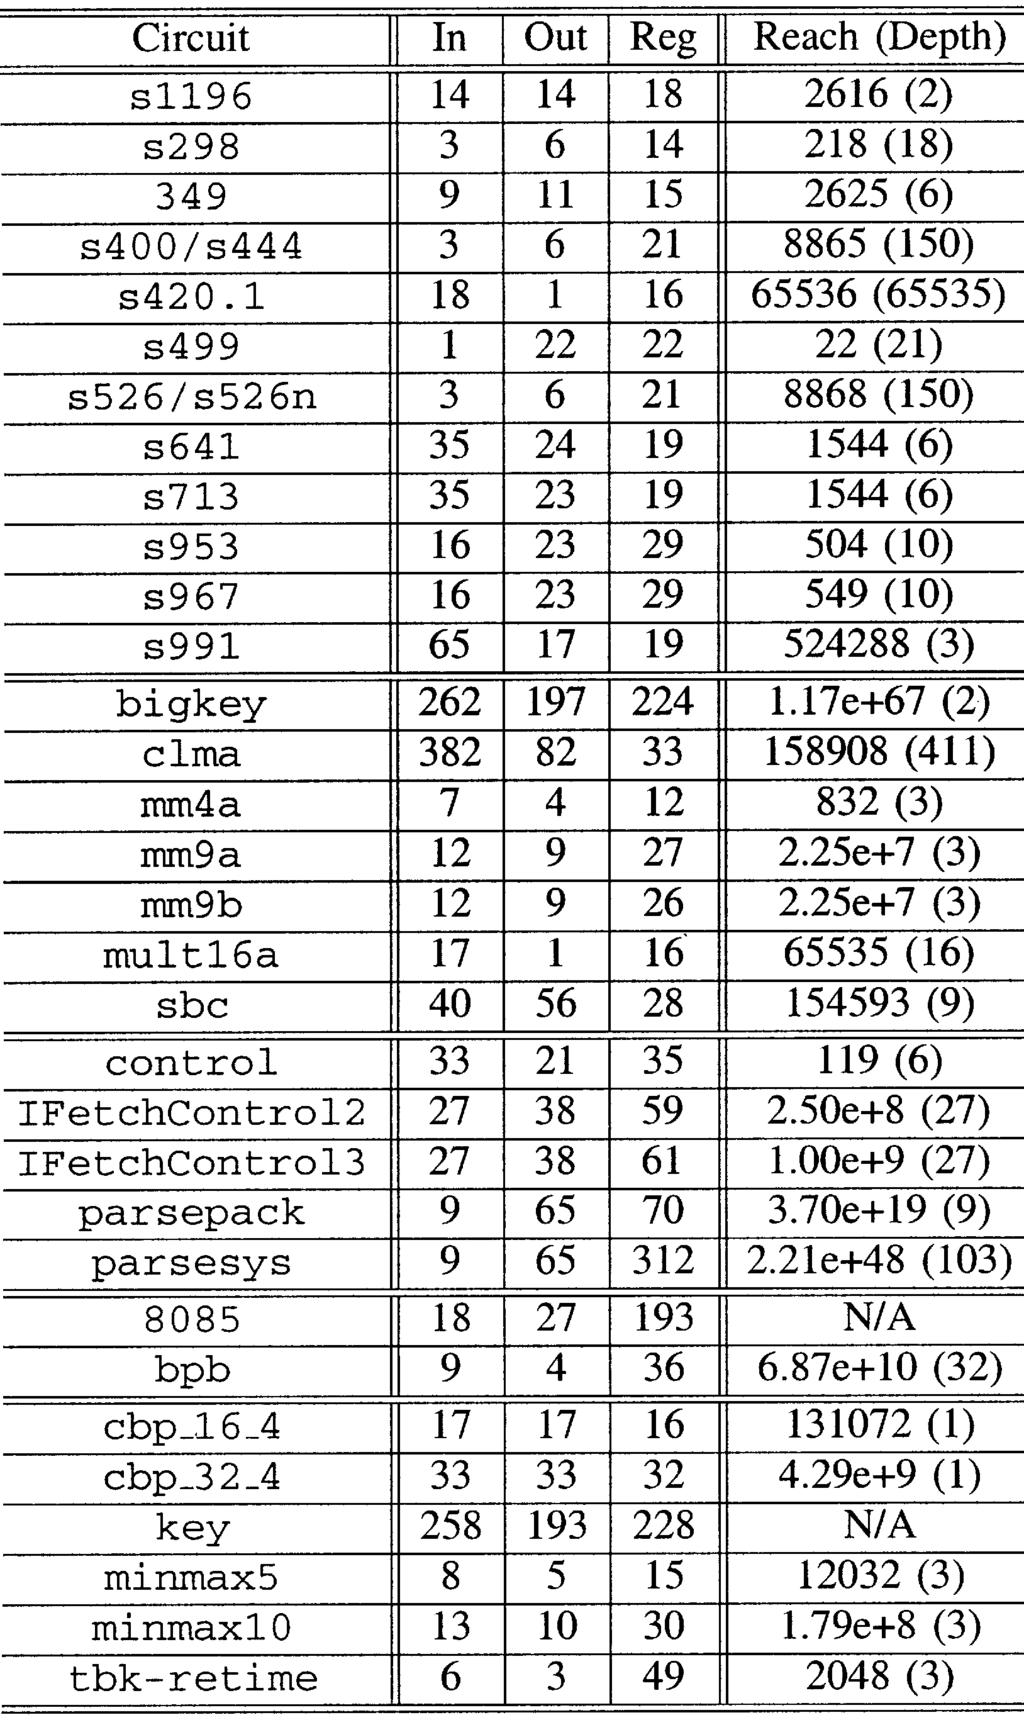 694 IEEE TRANSACTIONS ON COMPUTER-AIDED DESIGN OF INTEGRATED CIRCUITS AND SYSTEMS, VOL 22, NO 6, JUNE 2003 partitioning on Similarly, if, their equivalence can be confirmed in steps of state